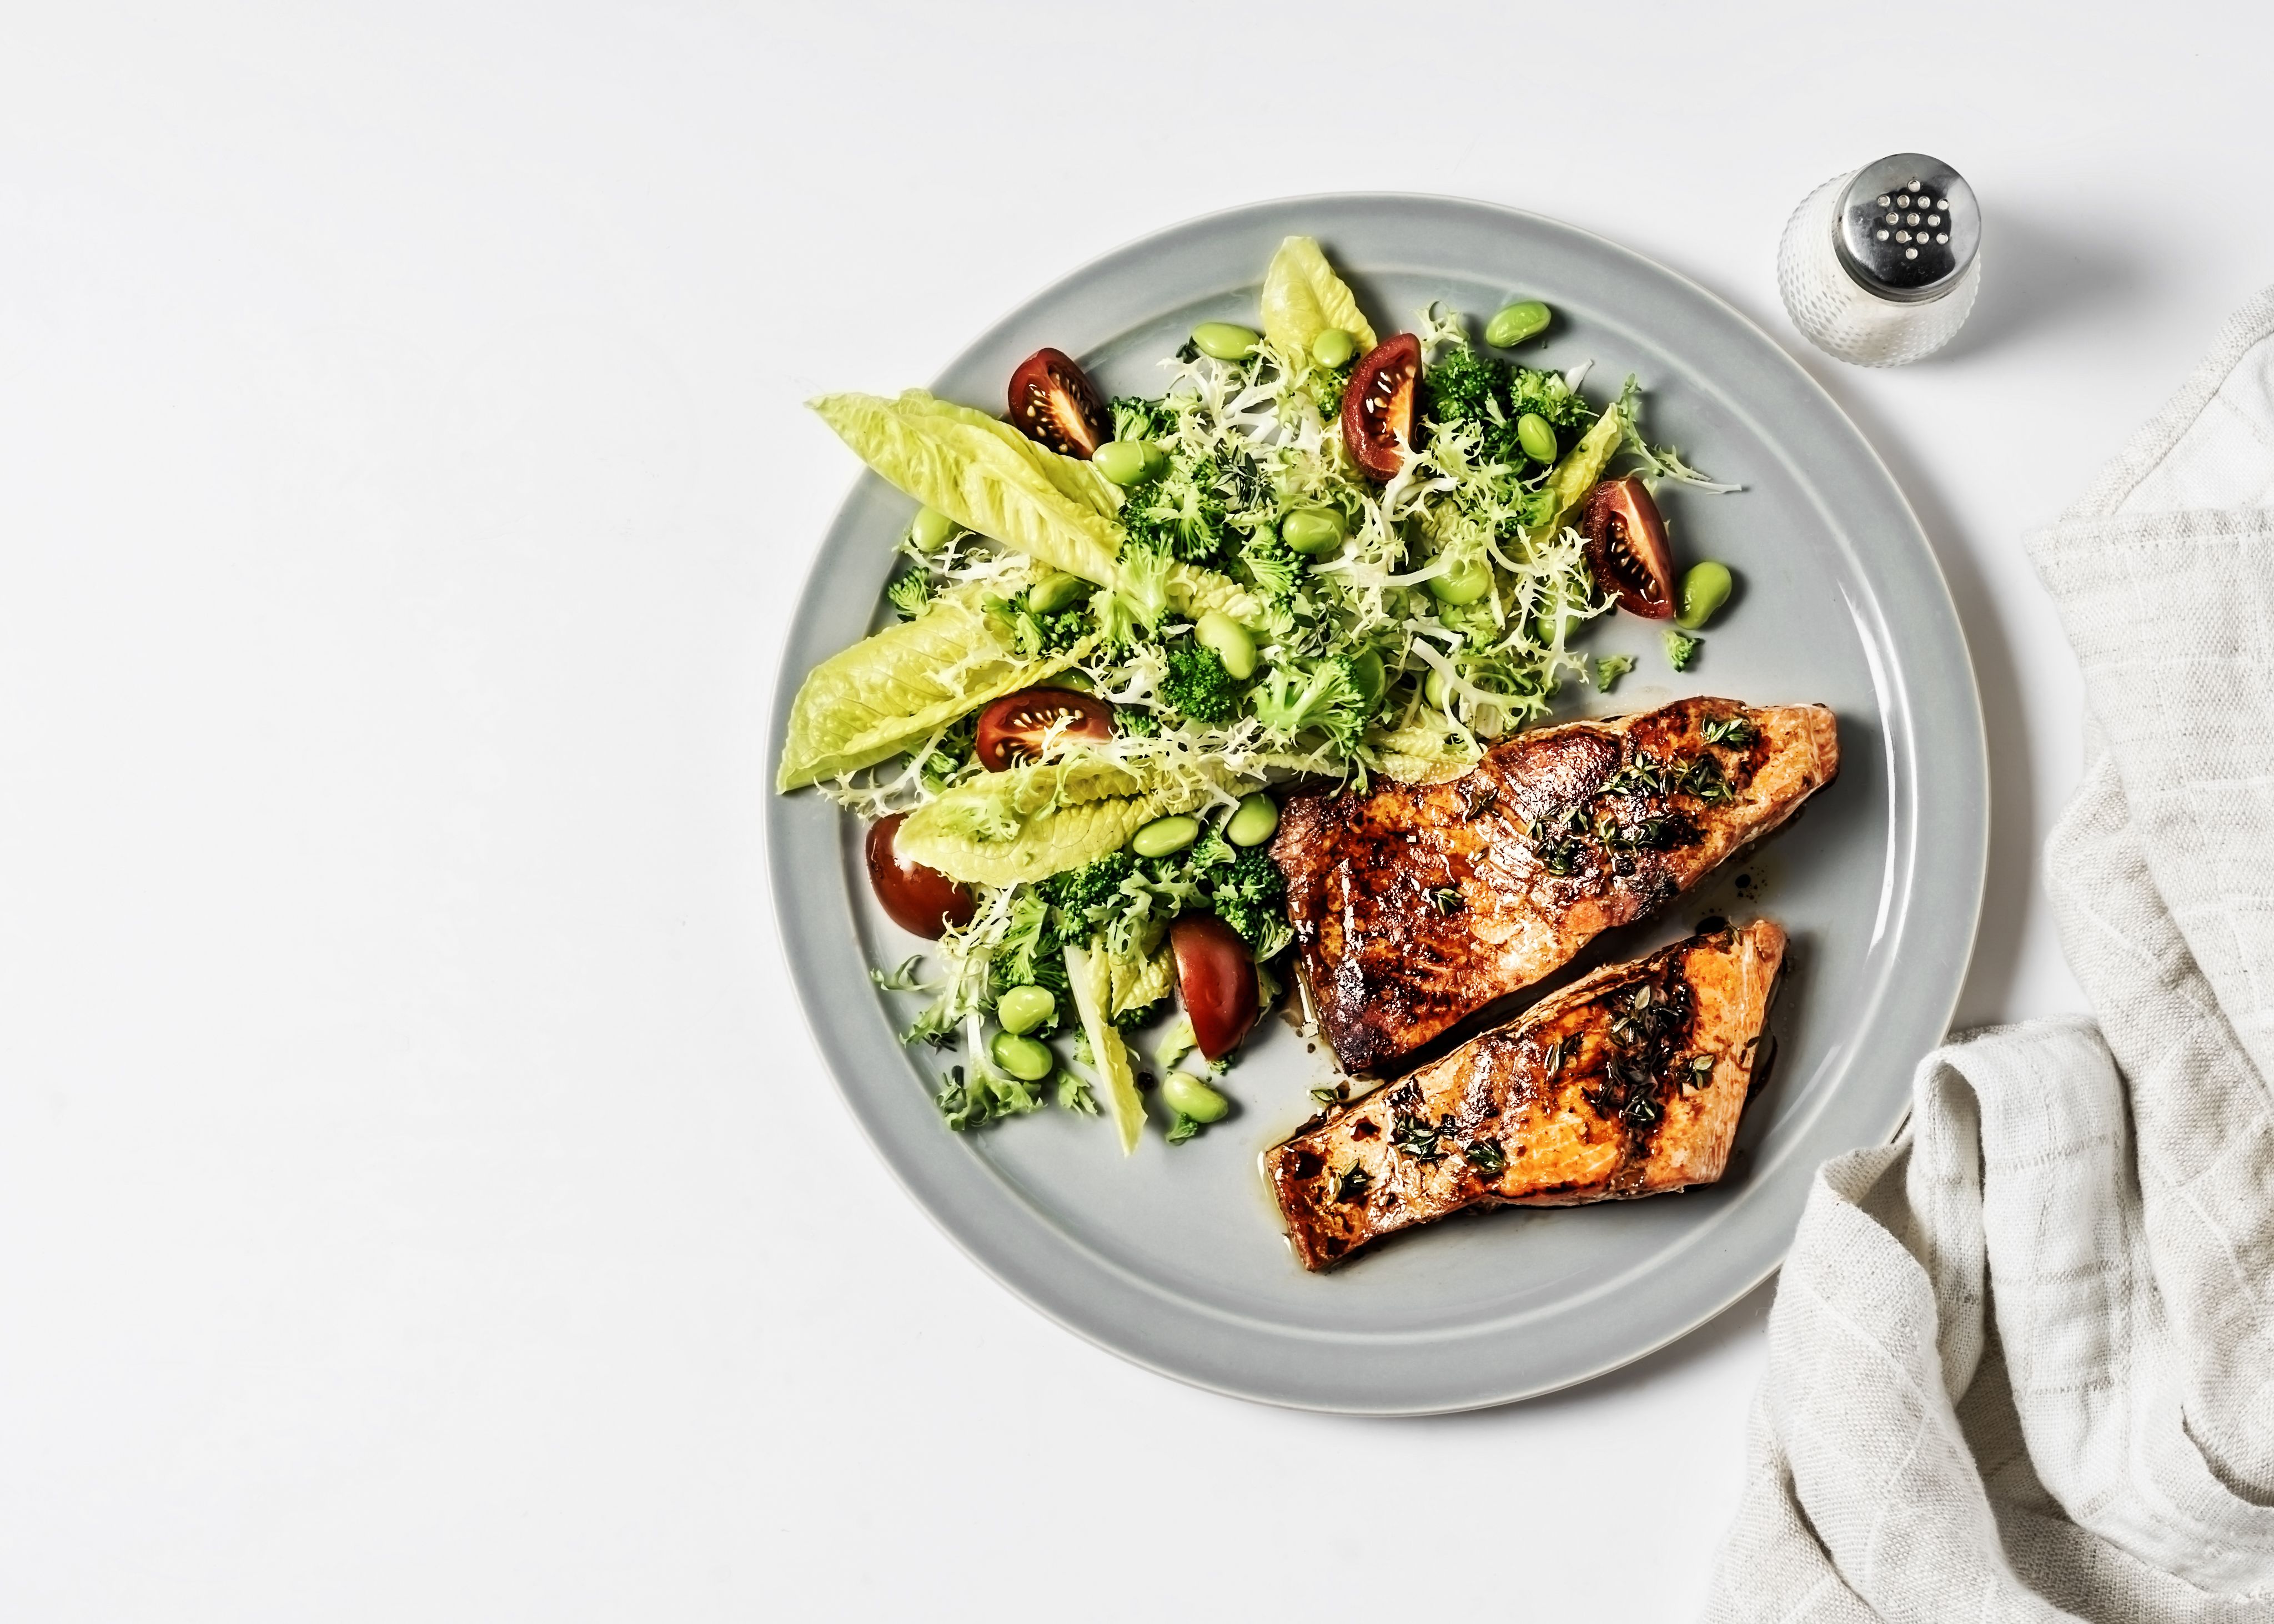 Balanced Meal: How to Build a Plate That Hits Your Health Goals